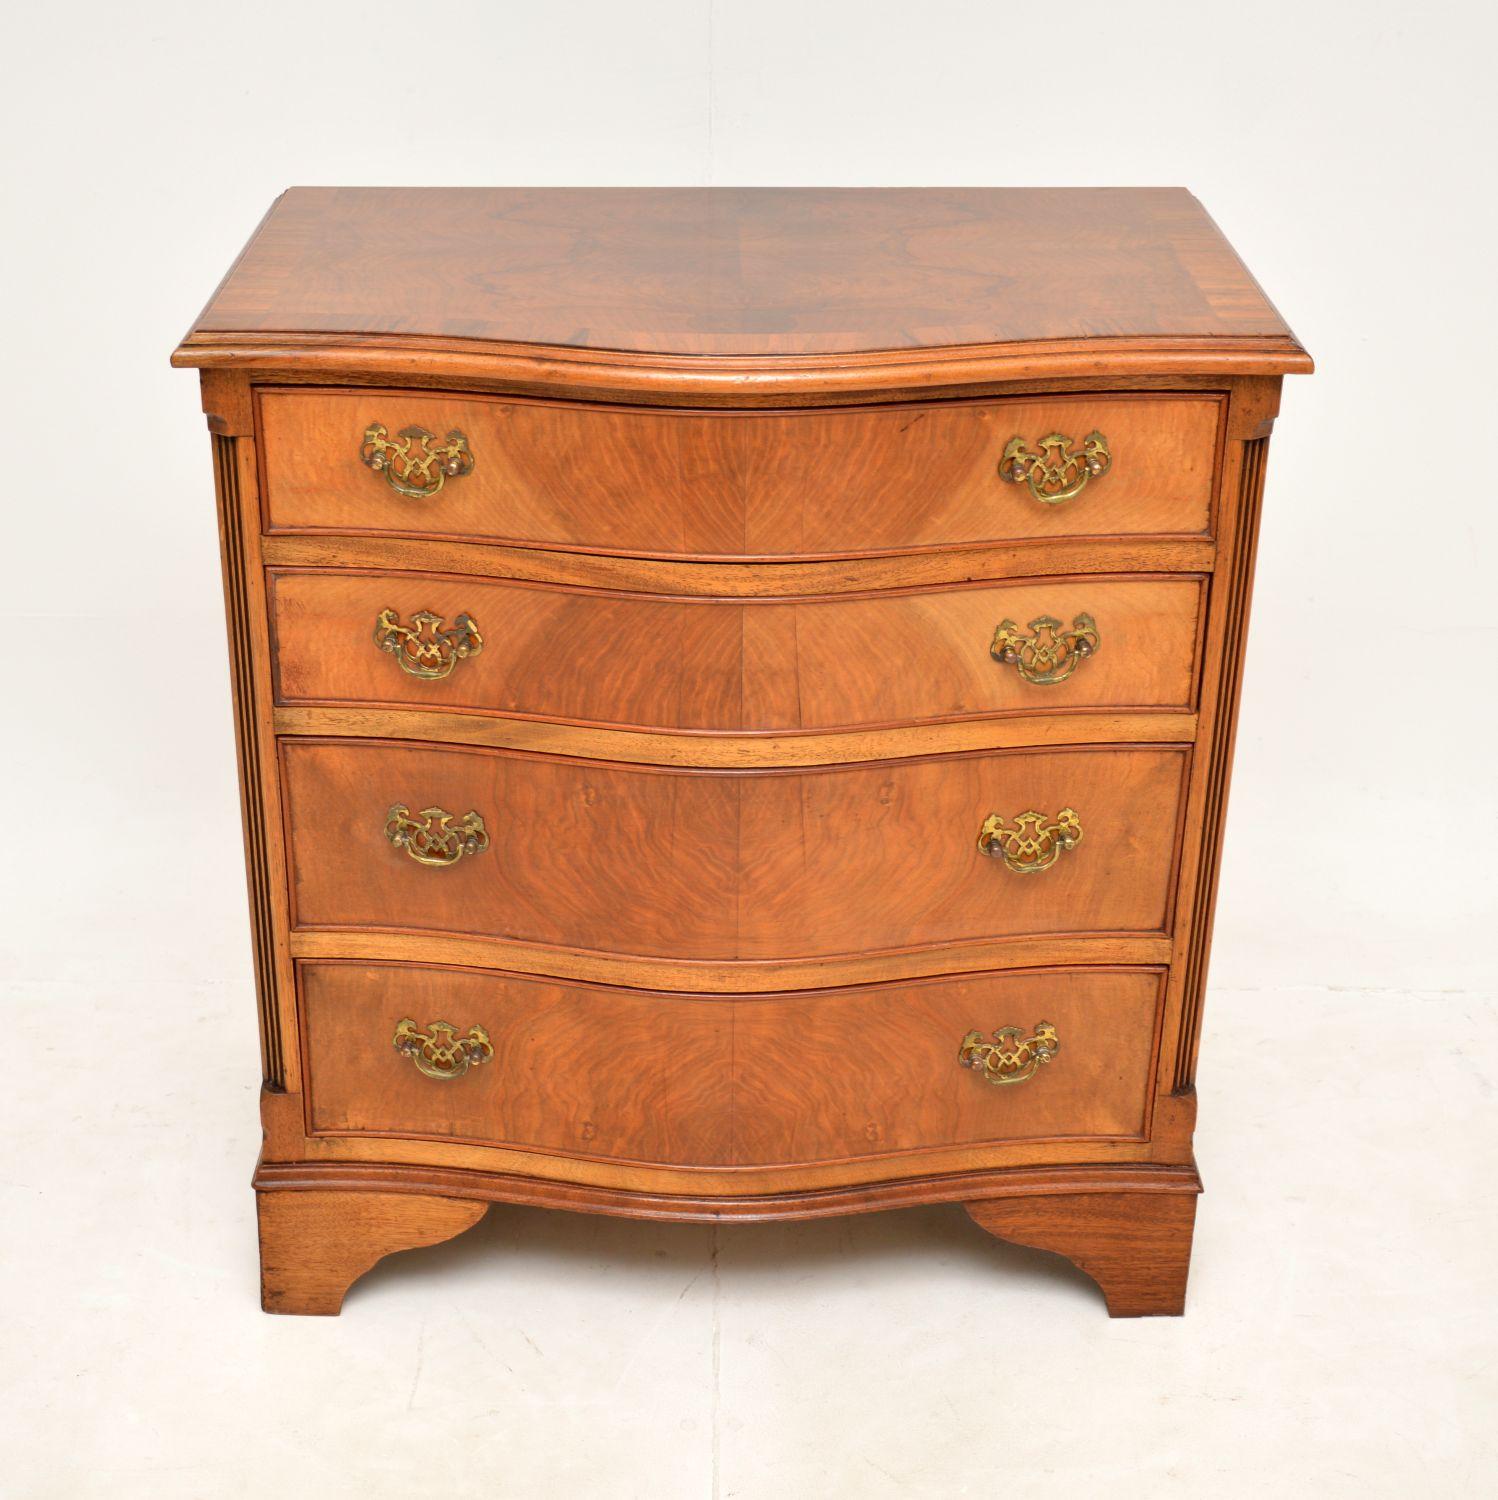 A very well made and useful antique walnut chest of drawers the Georgian style. This was made in England, it dates from around the 1930’s.

It is of lovely quality and is a great size, not too imposing yet offering plenty of storage space. This